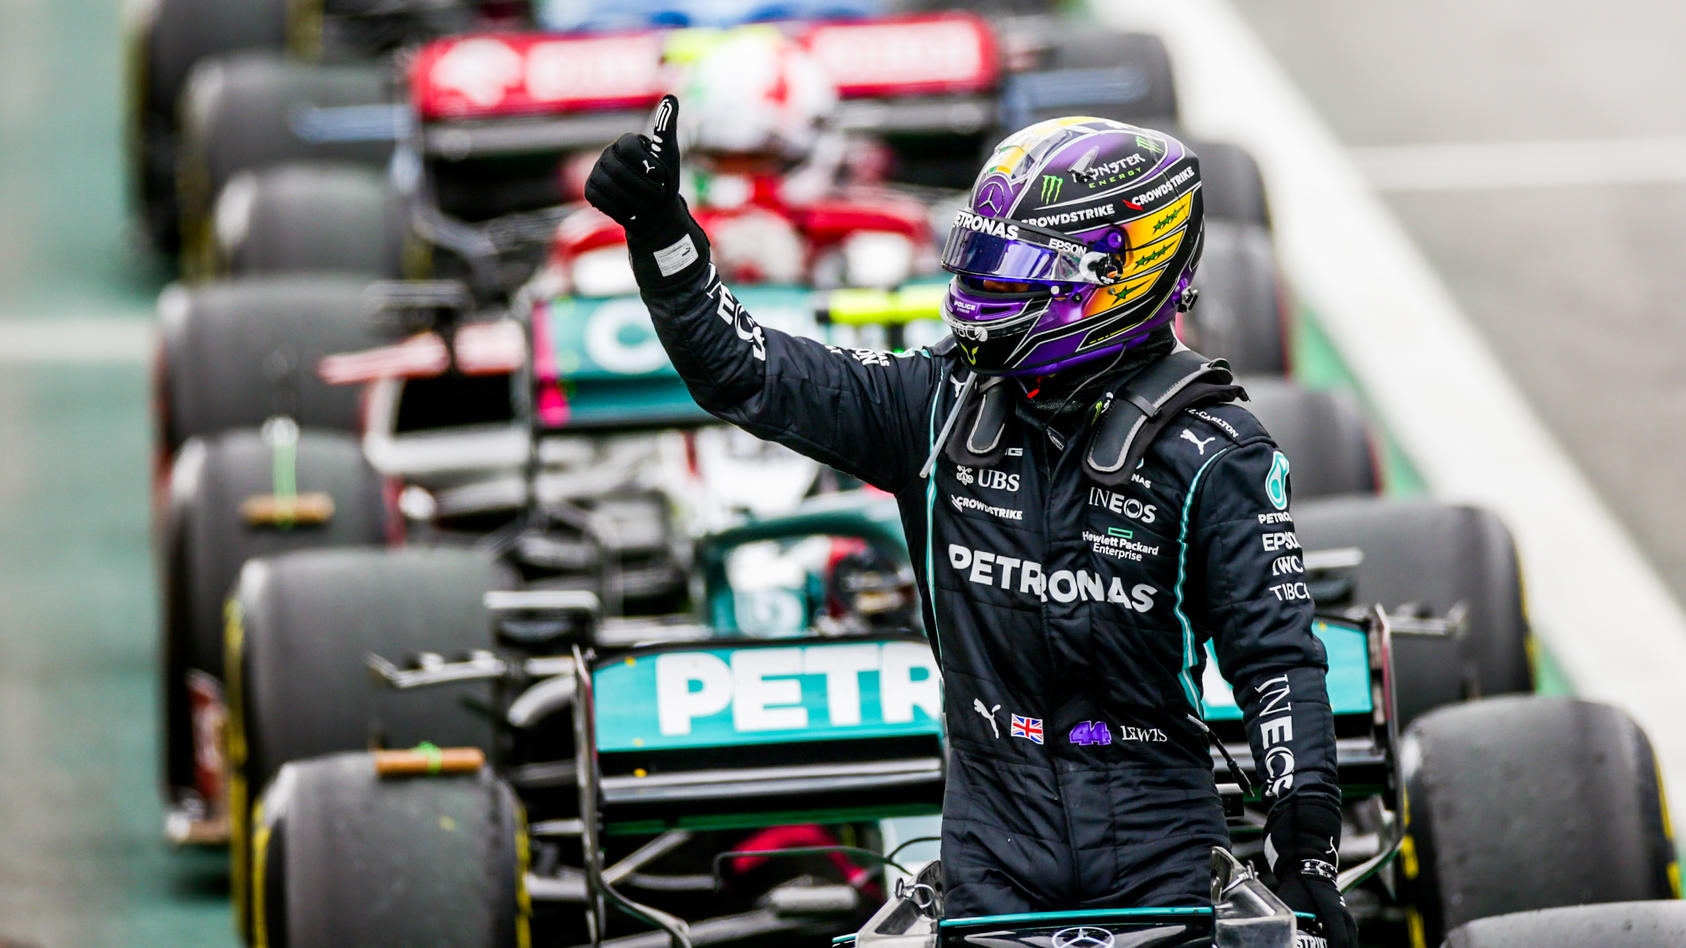 *** BESTPIX *** SAO PAULO, BRAZIL - NOVEMBER 13: Lewis Hamilton of Mercedes and Great Britain waves to the crowd after finishing in fifth position during the sprint ahead of the F1 Grand Prix of Brazil at Autodromo Jose Carlos Pace on November 13, 20